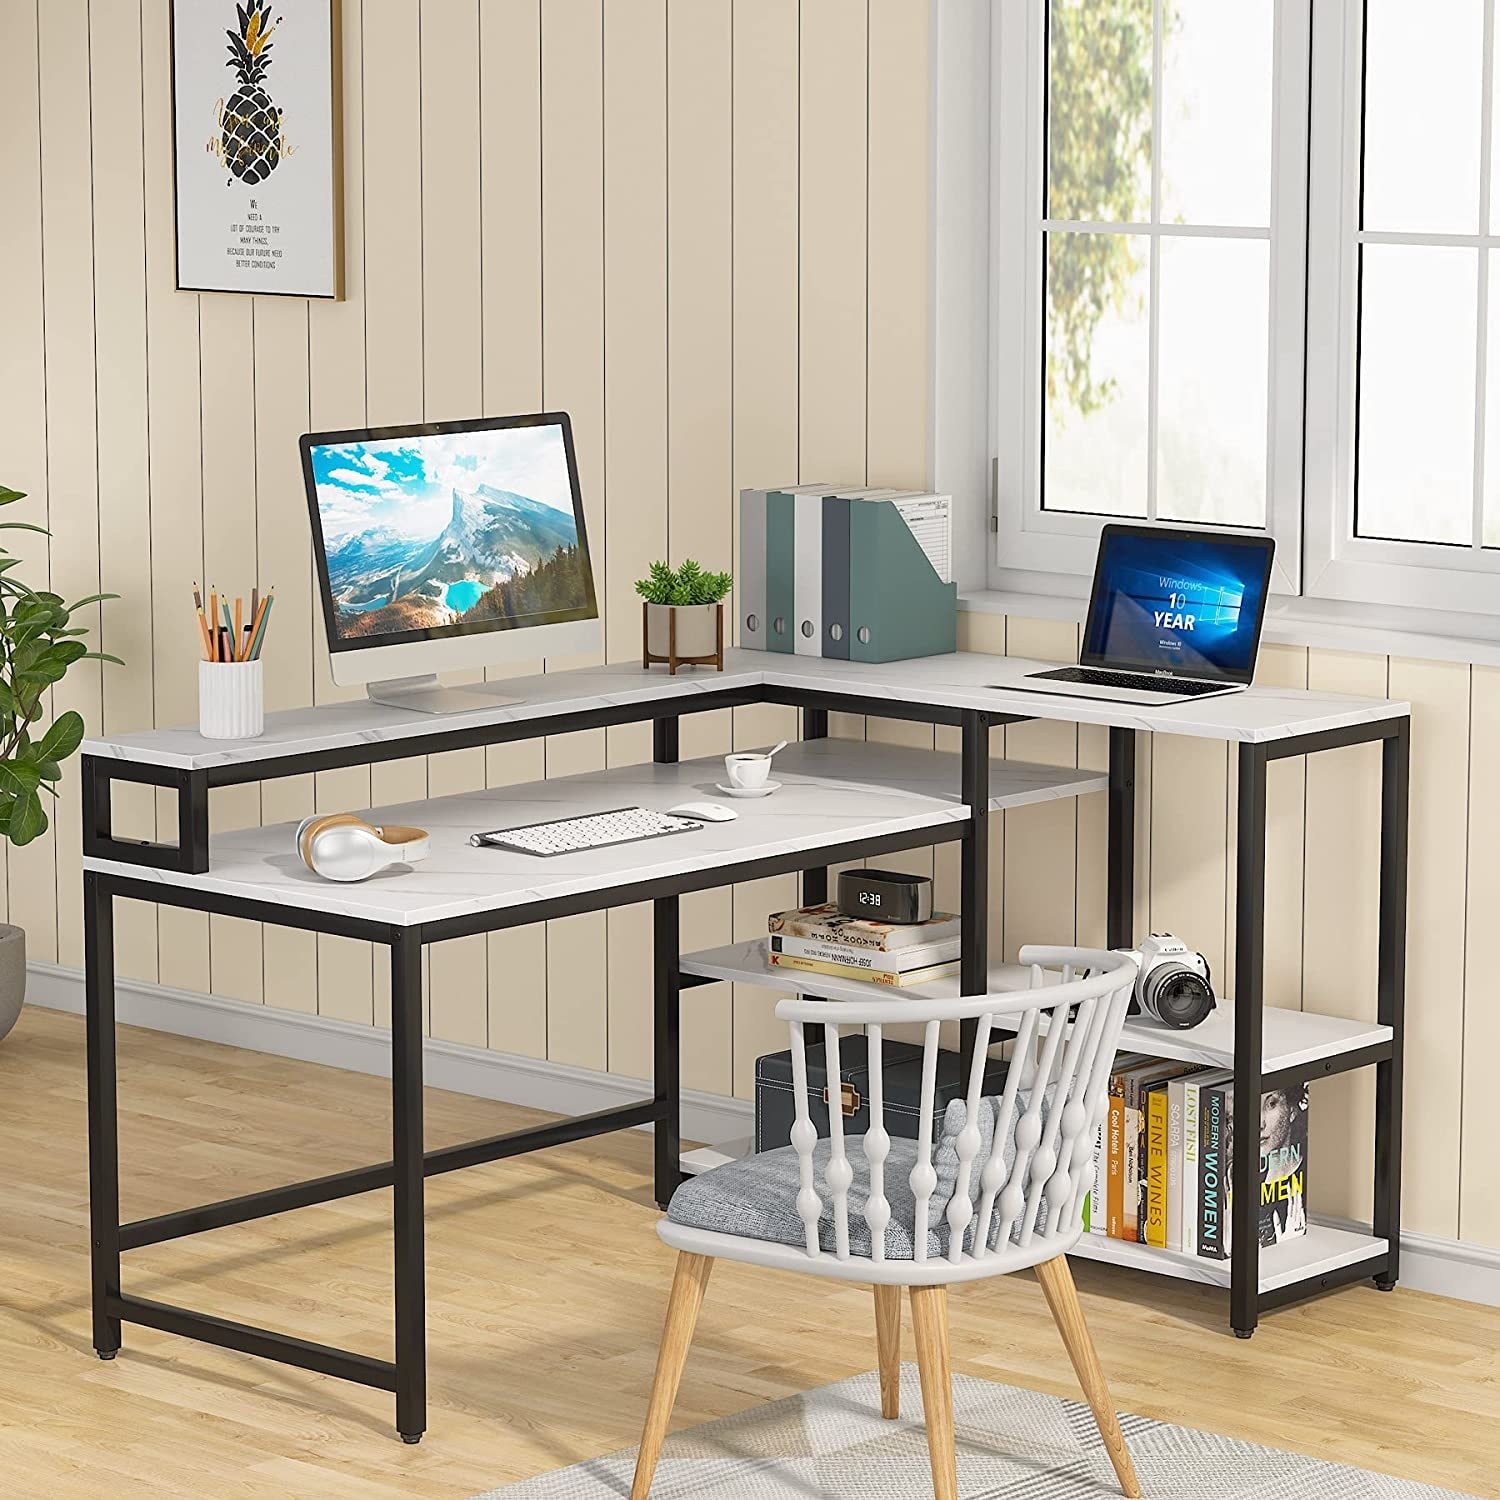 https://ak1.ostkcdn.com/images/products/is/images/direct/70ee47635e1f55b89831f2015c516943cc06a1cd/Reversible-L-Shaped-Computer-Desk-with-Storage-Shelf-and-Monitor-Stand.jpg